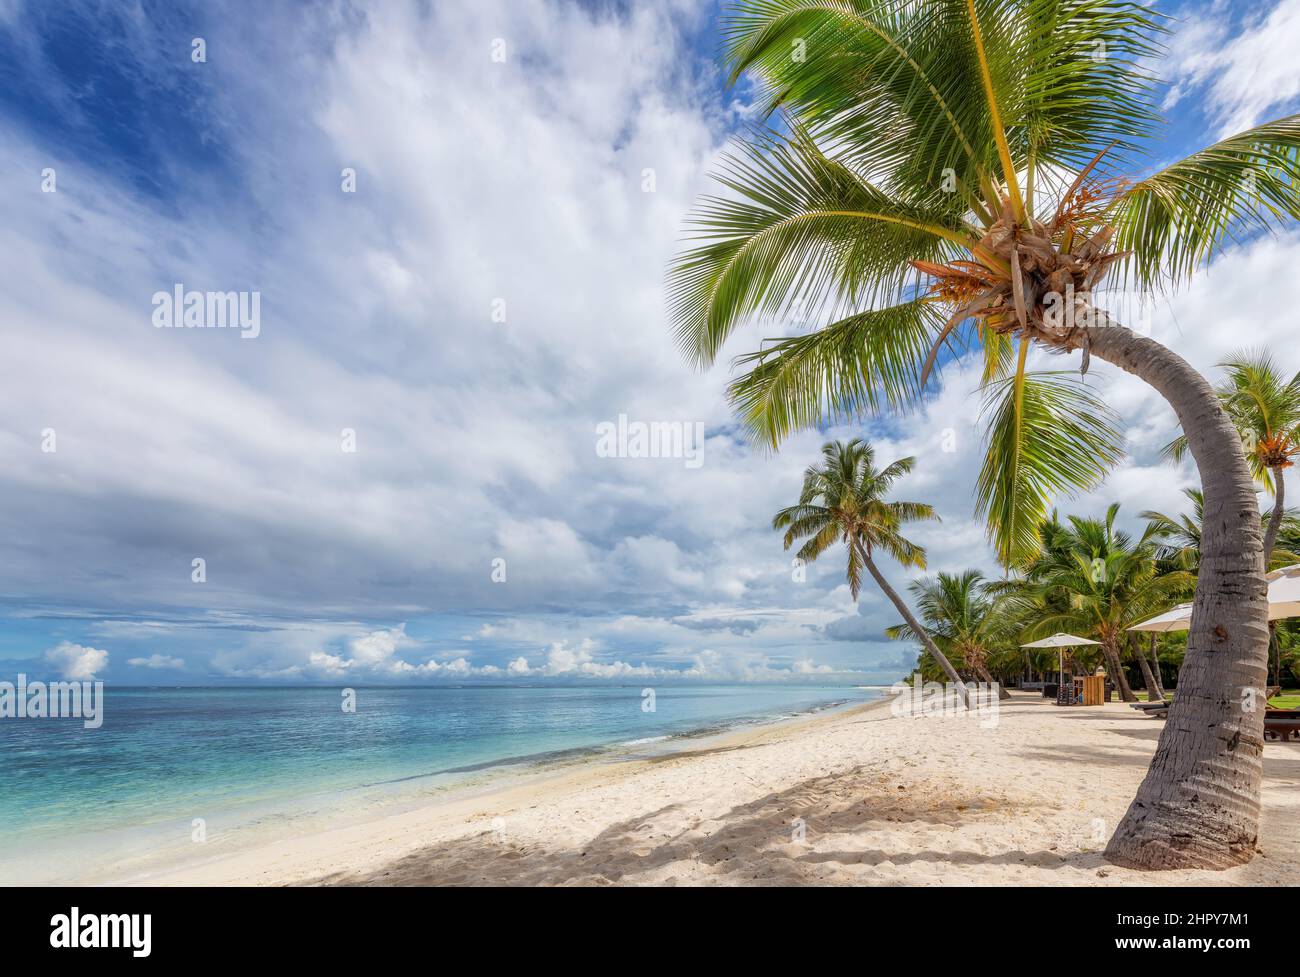 Coco palm trees in sandy beach in tropical island and turquoise sea Stock Photo